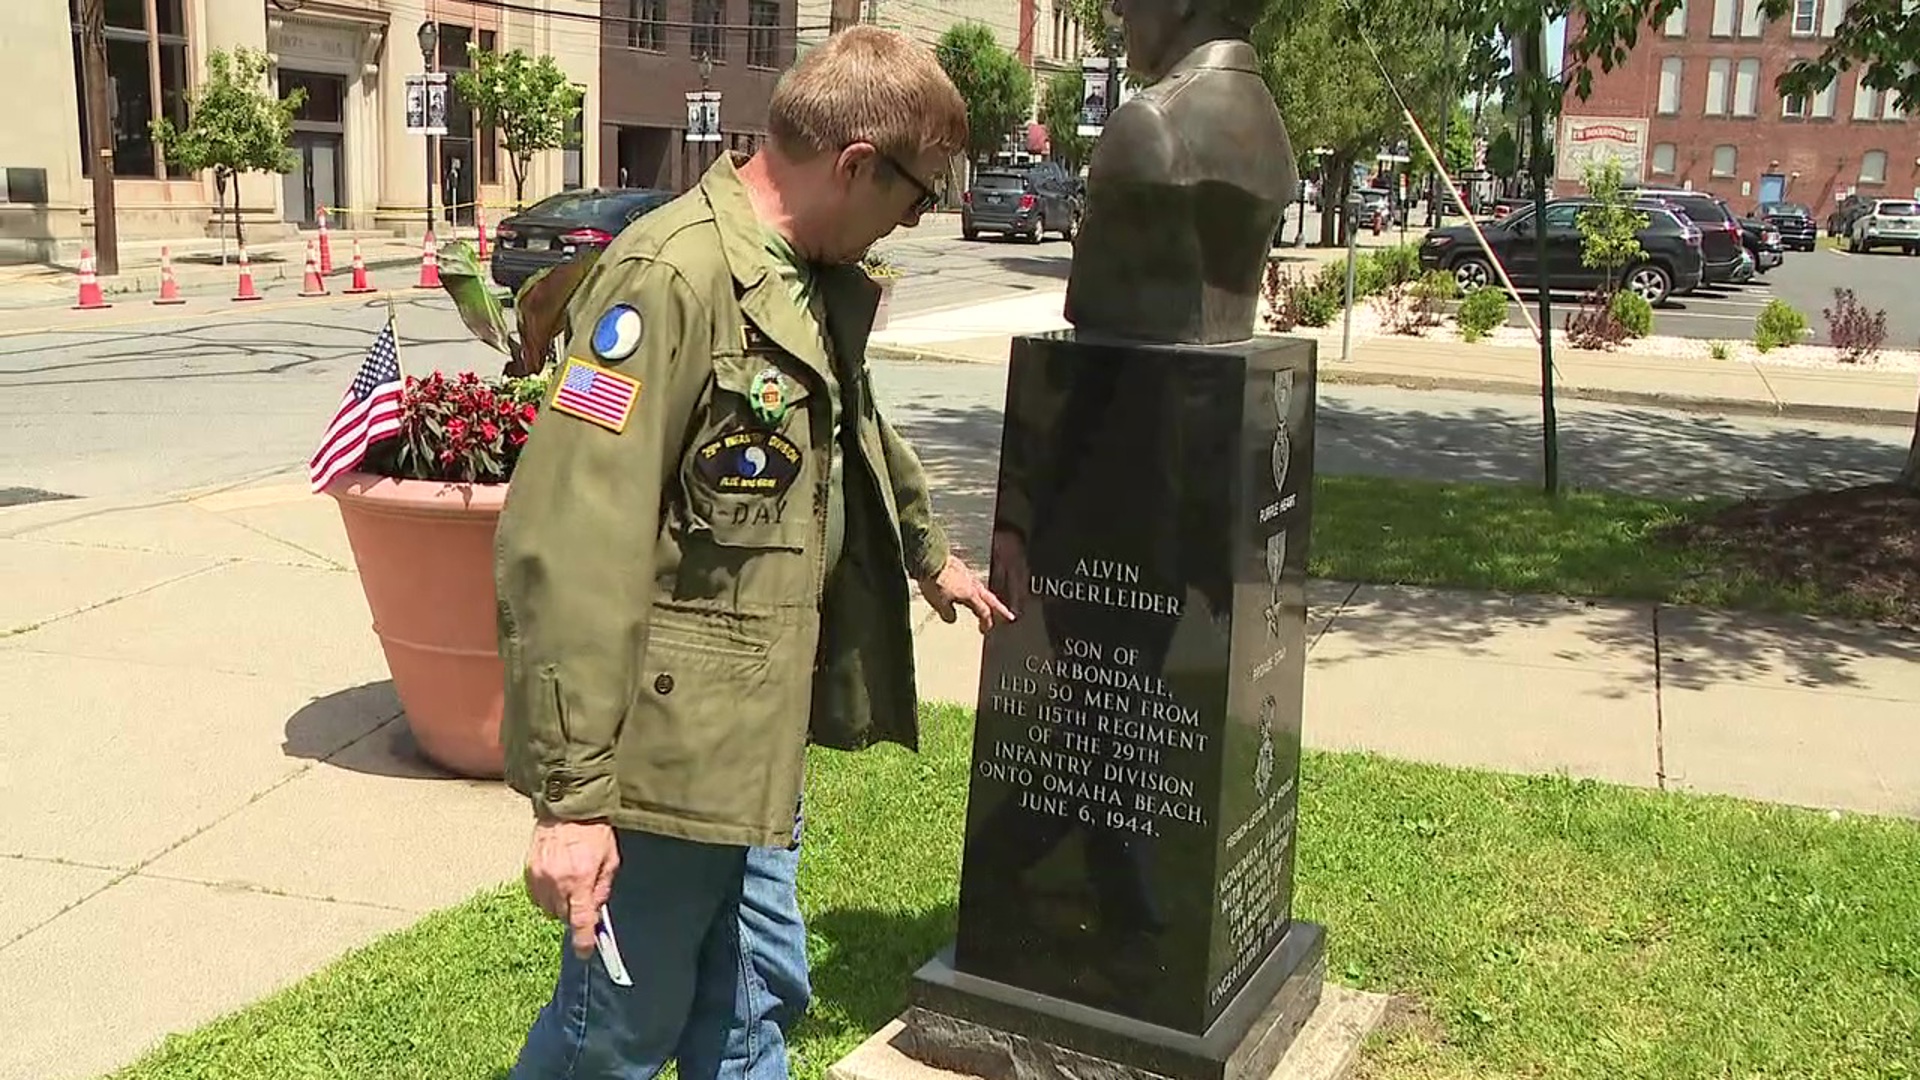 Newswatch 16's Melissa Steininger spoke with a Carbondale man looking to keep alive the stories of D-Day veterans from his community and his own family.